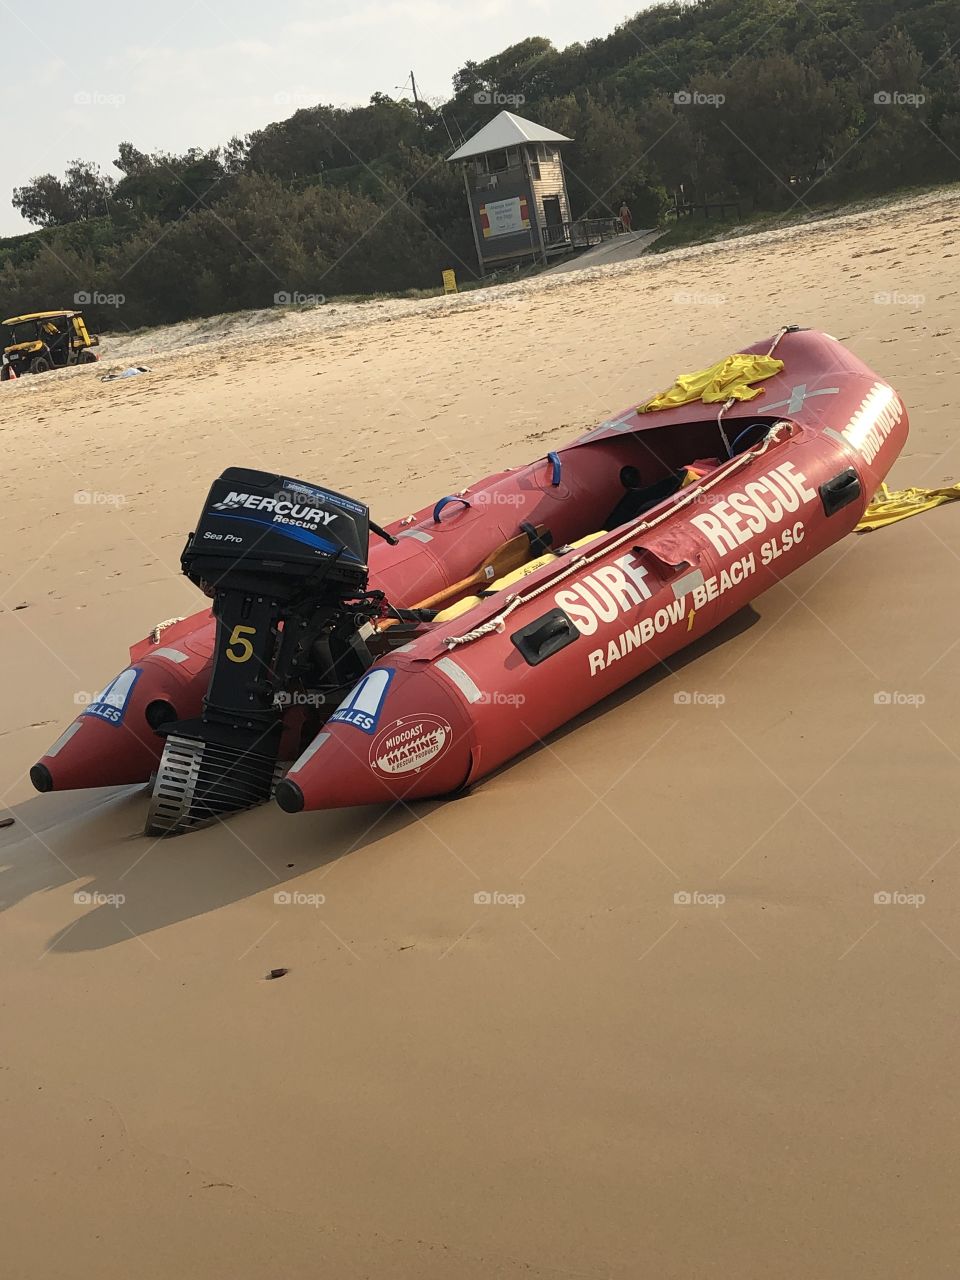 Surf rescue boat